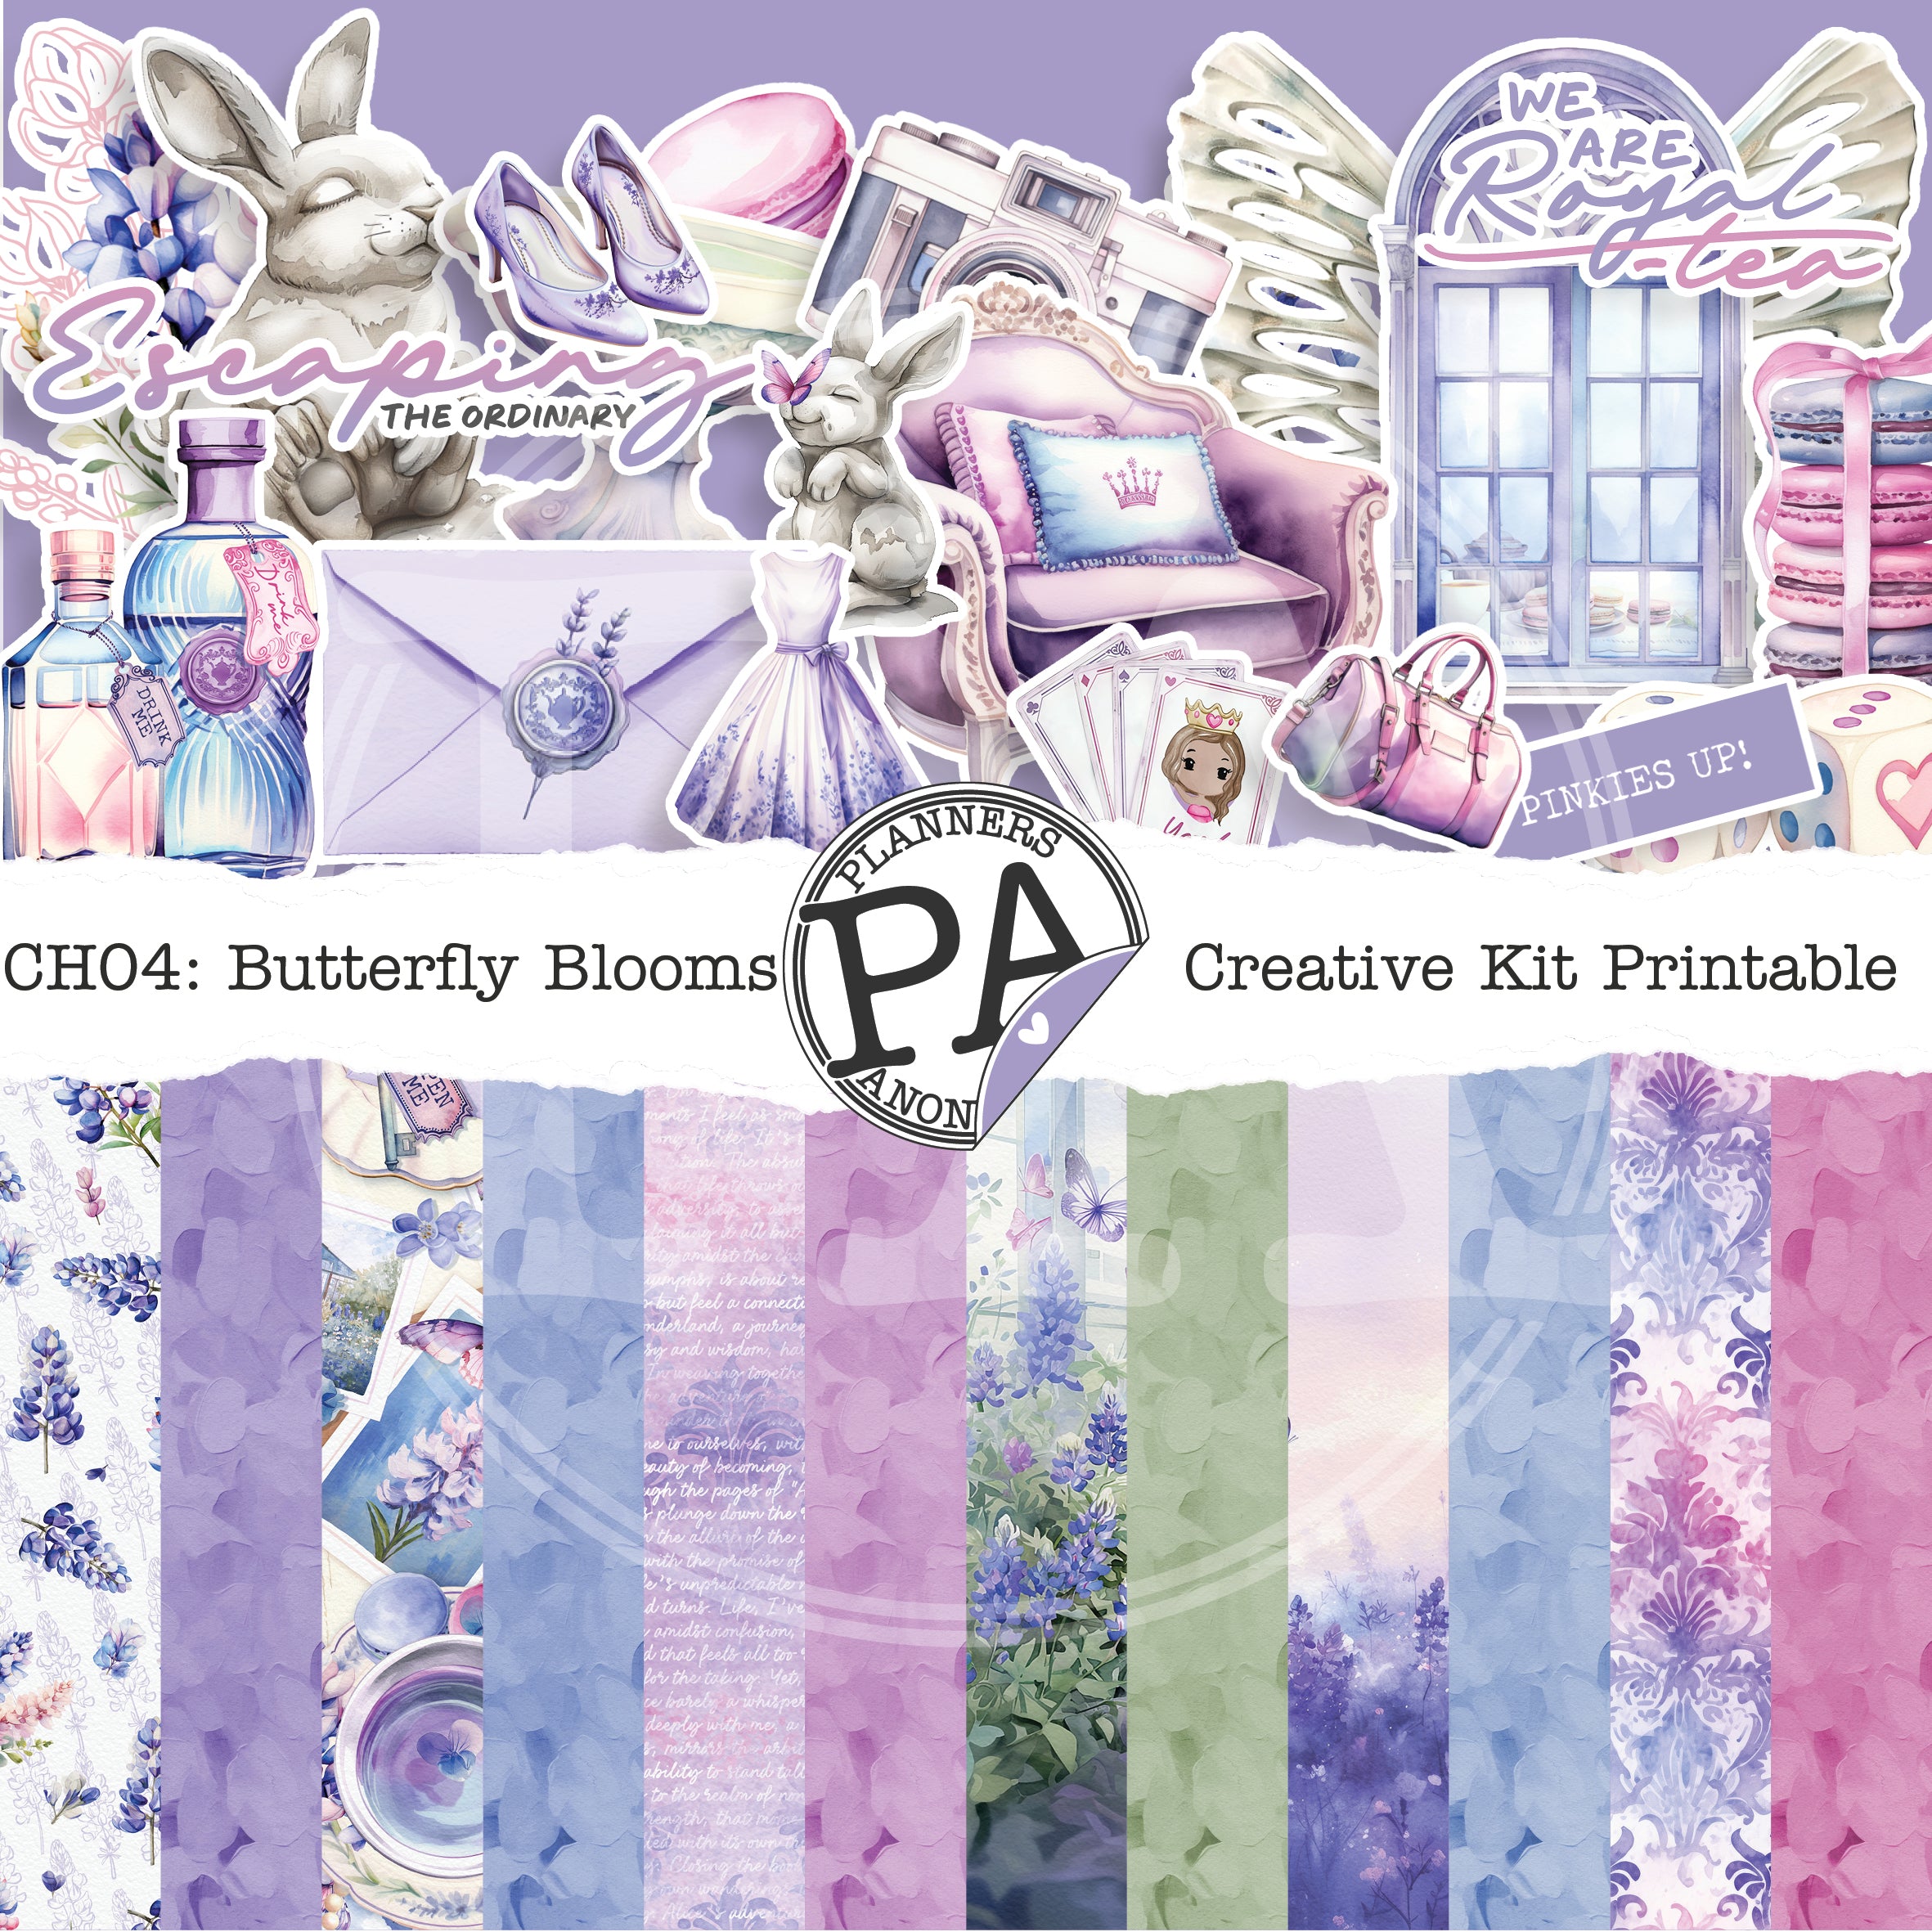 CH04: Butterfly Blooms Creative Kit